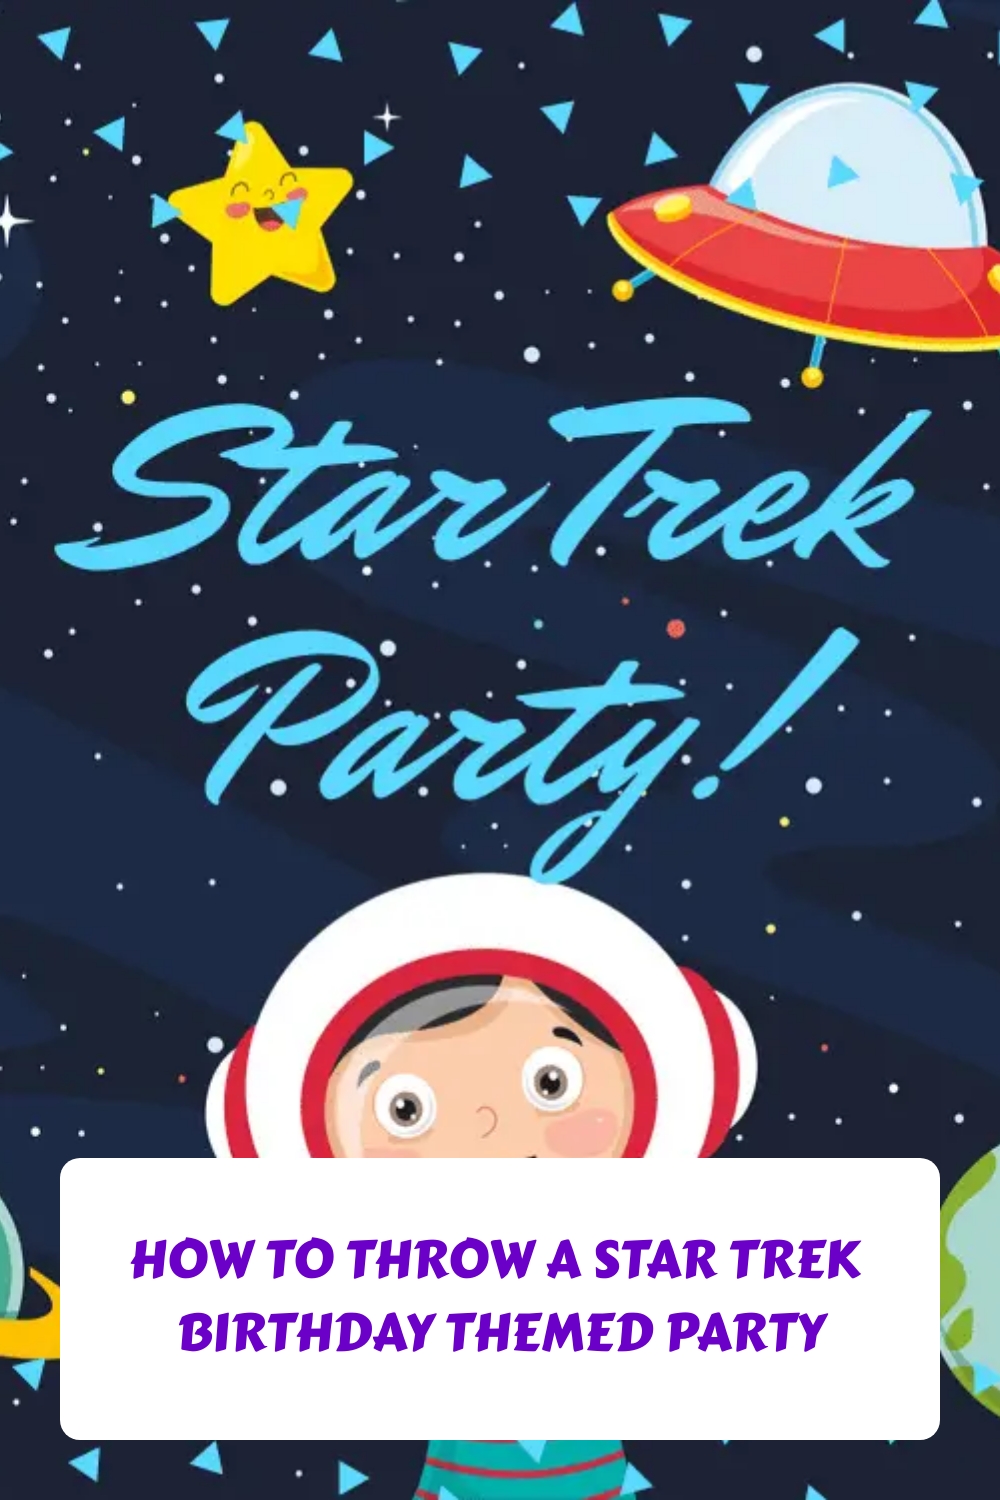 How to Throw a Star Trek Birthday Themed Party generated pin 56635